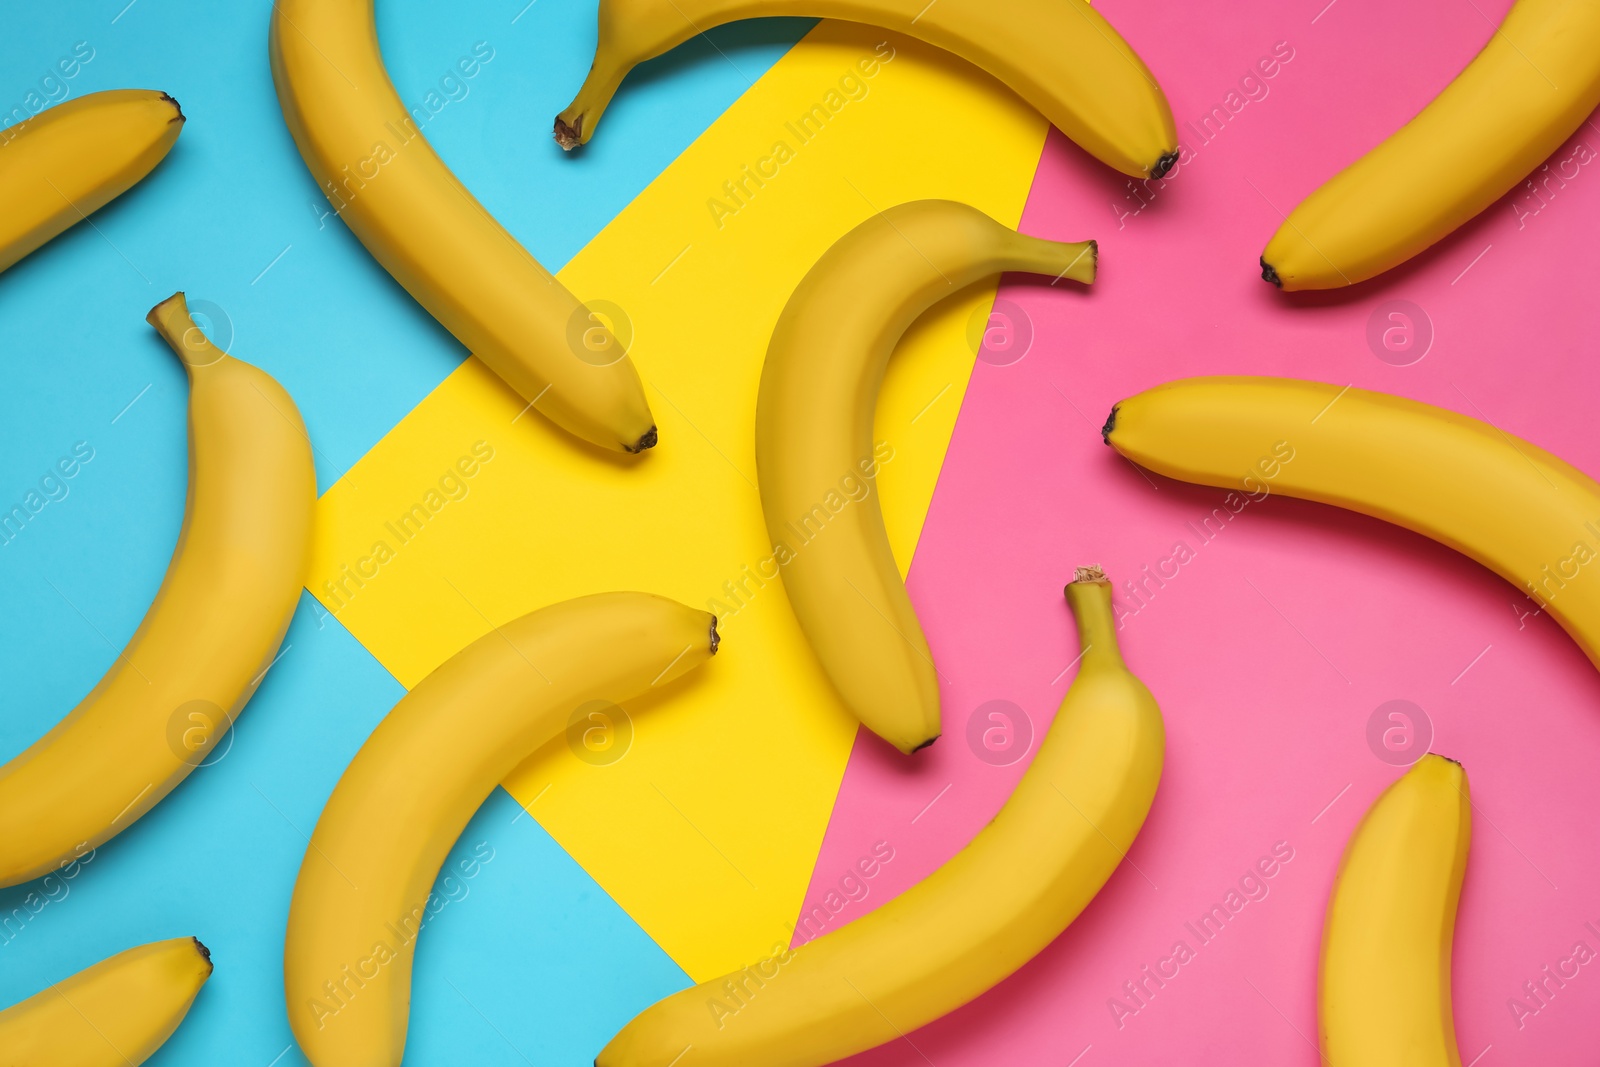 Photo of Ripe yellow bananas on color background, flat lay